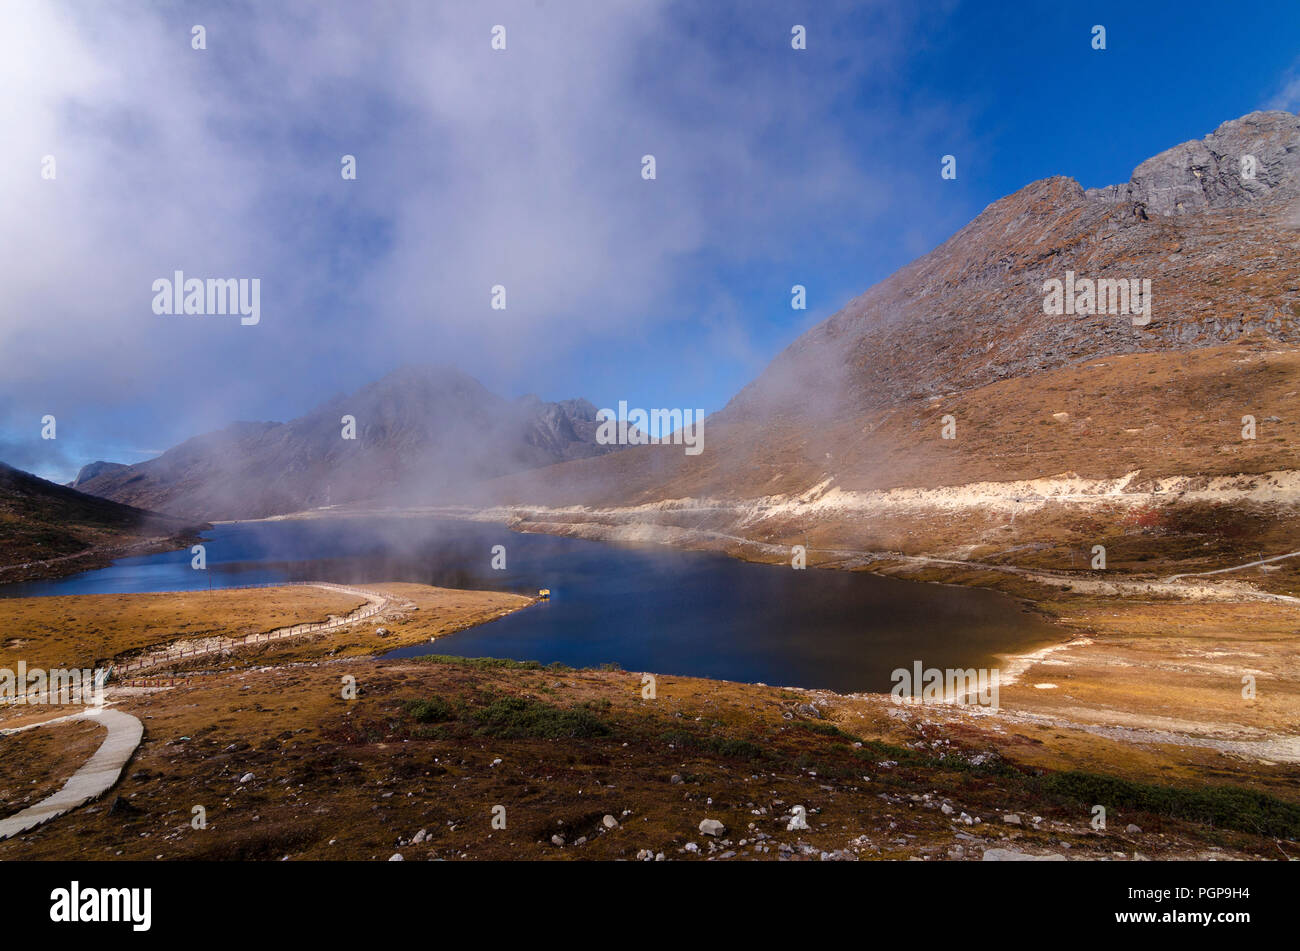 A landscape of the Himalayas with  the beautiful Paradise lake at selapass. Stock Photo